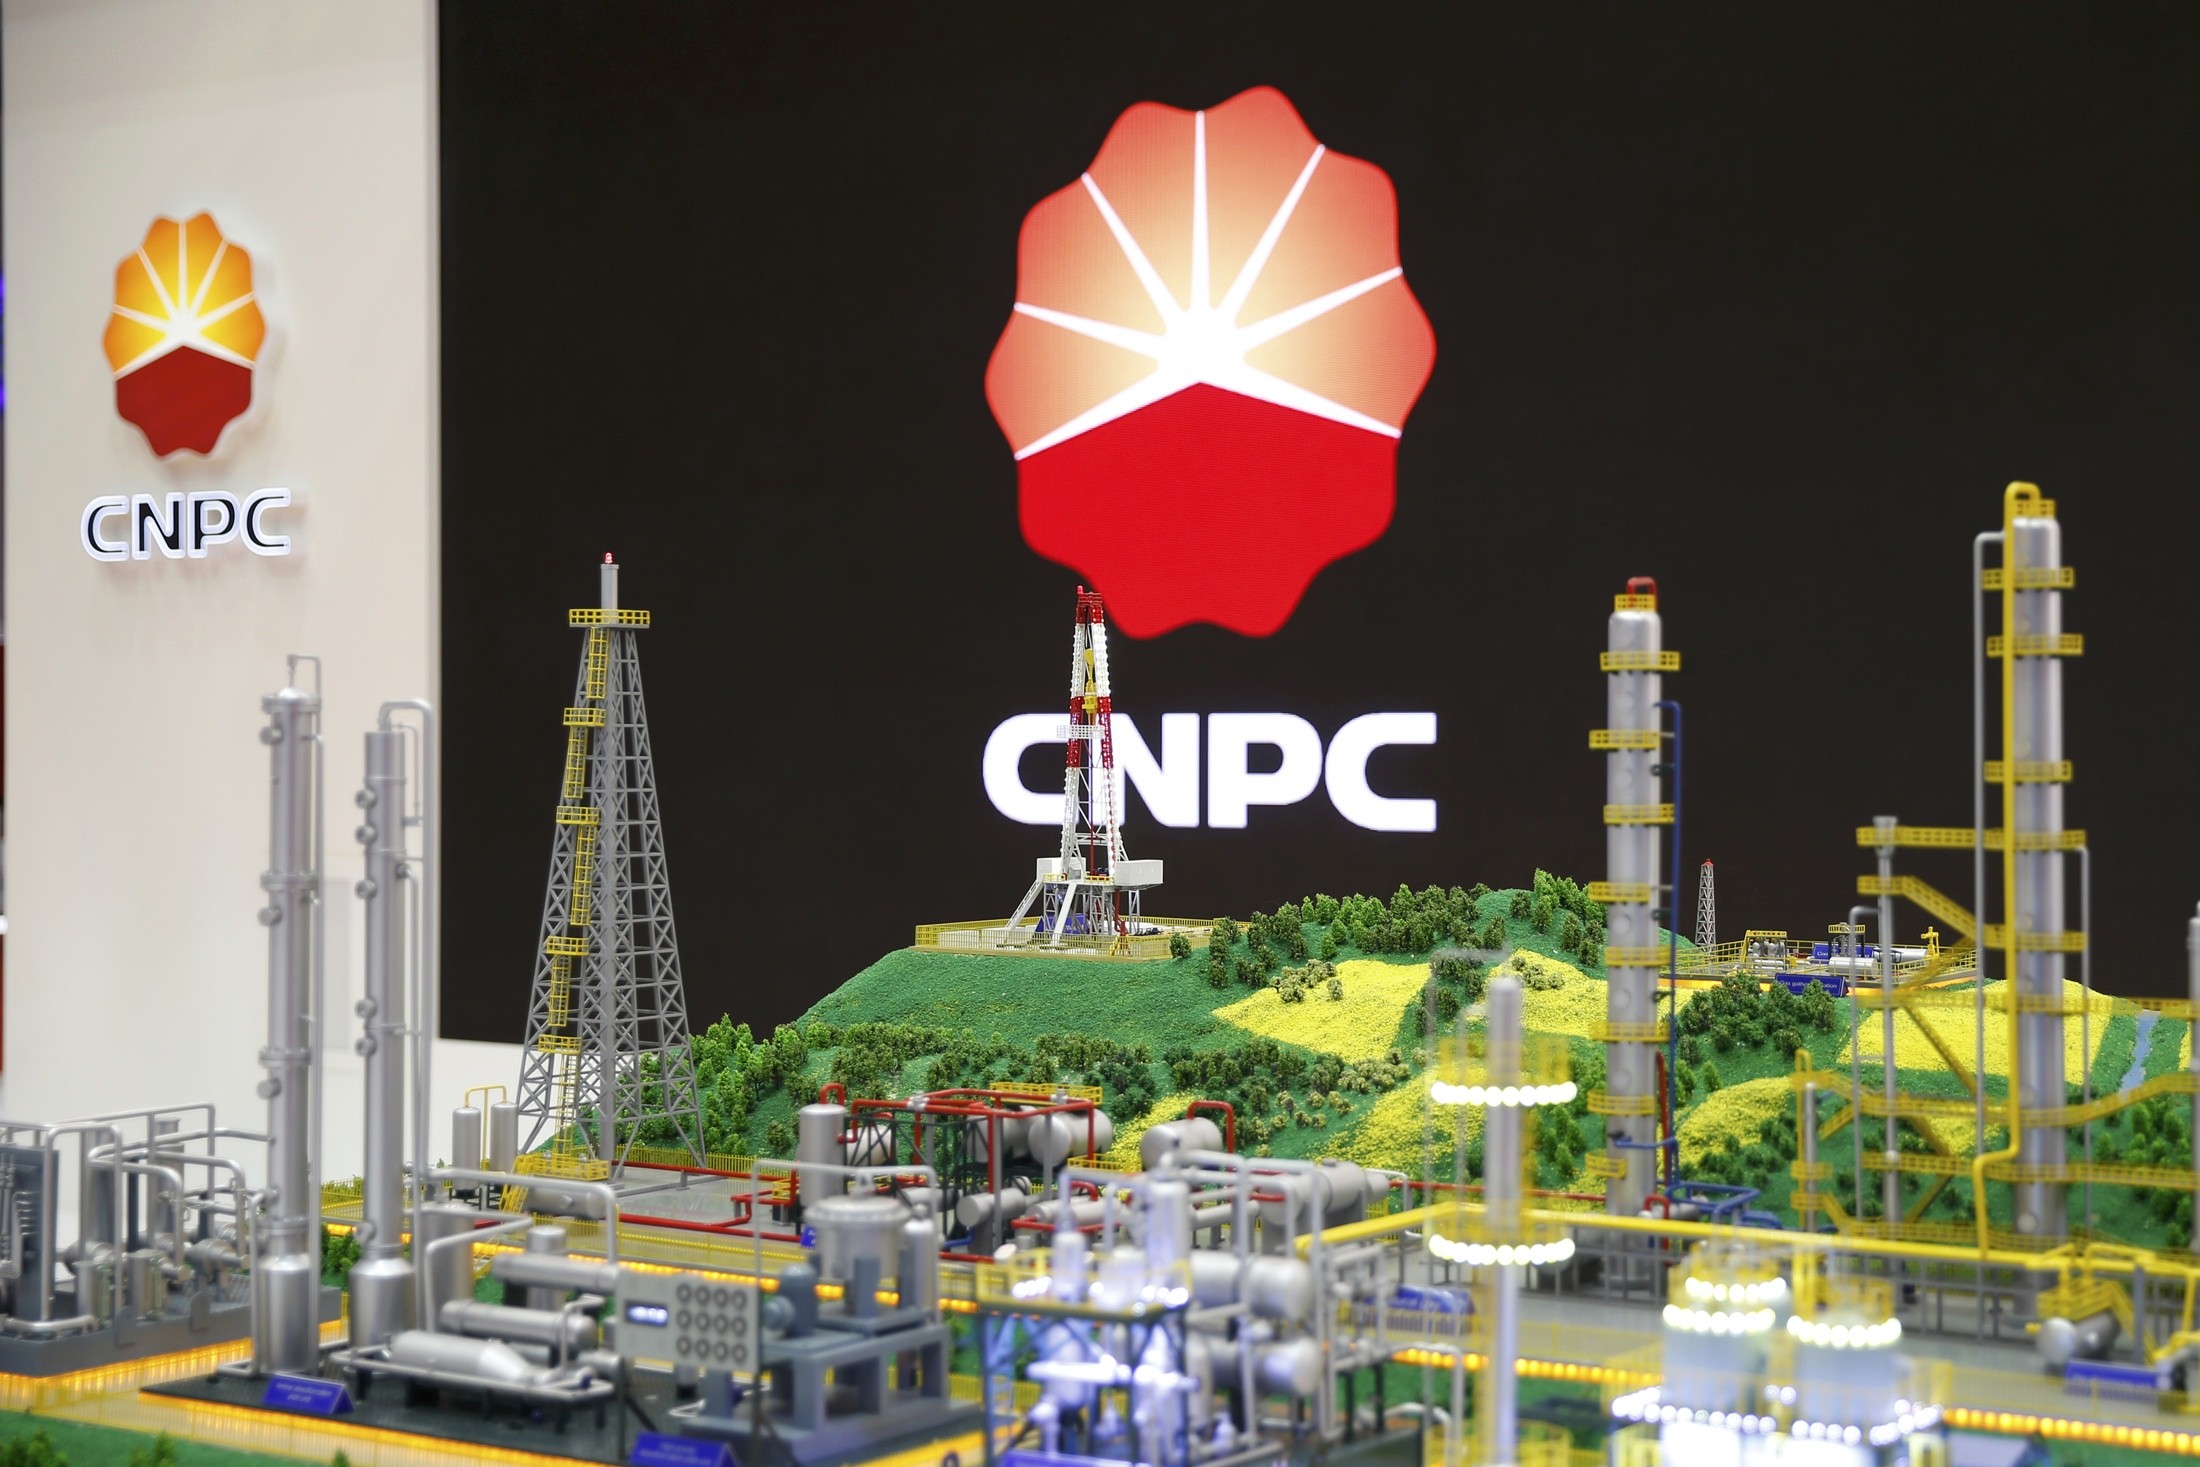 The logo of CNPC (China National Petroleum Corporation) is pictured at the 26th World Gas Conference in Paris, France, June 2, 2015. Photo: Reuters